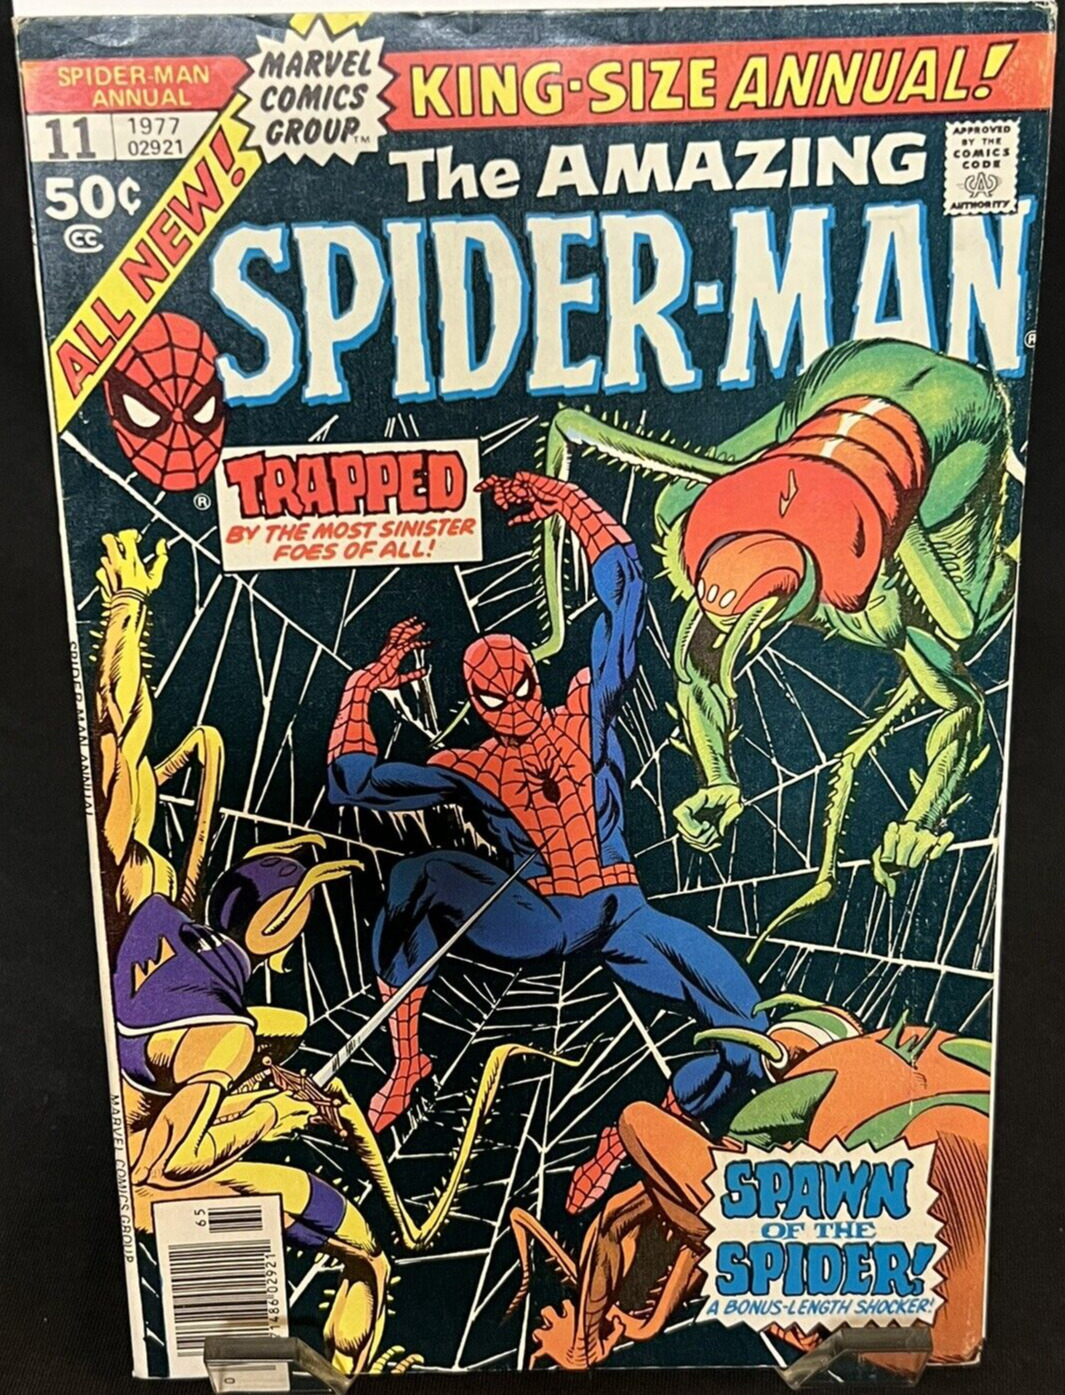 The Amazing Spider-man King Size Annual #11 (1977) Marvel Comics